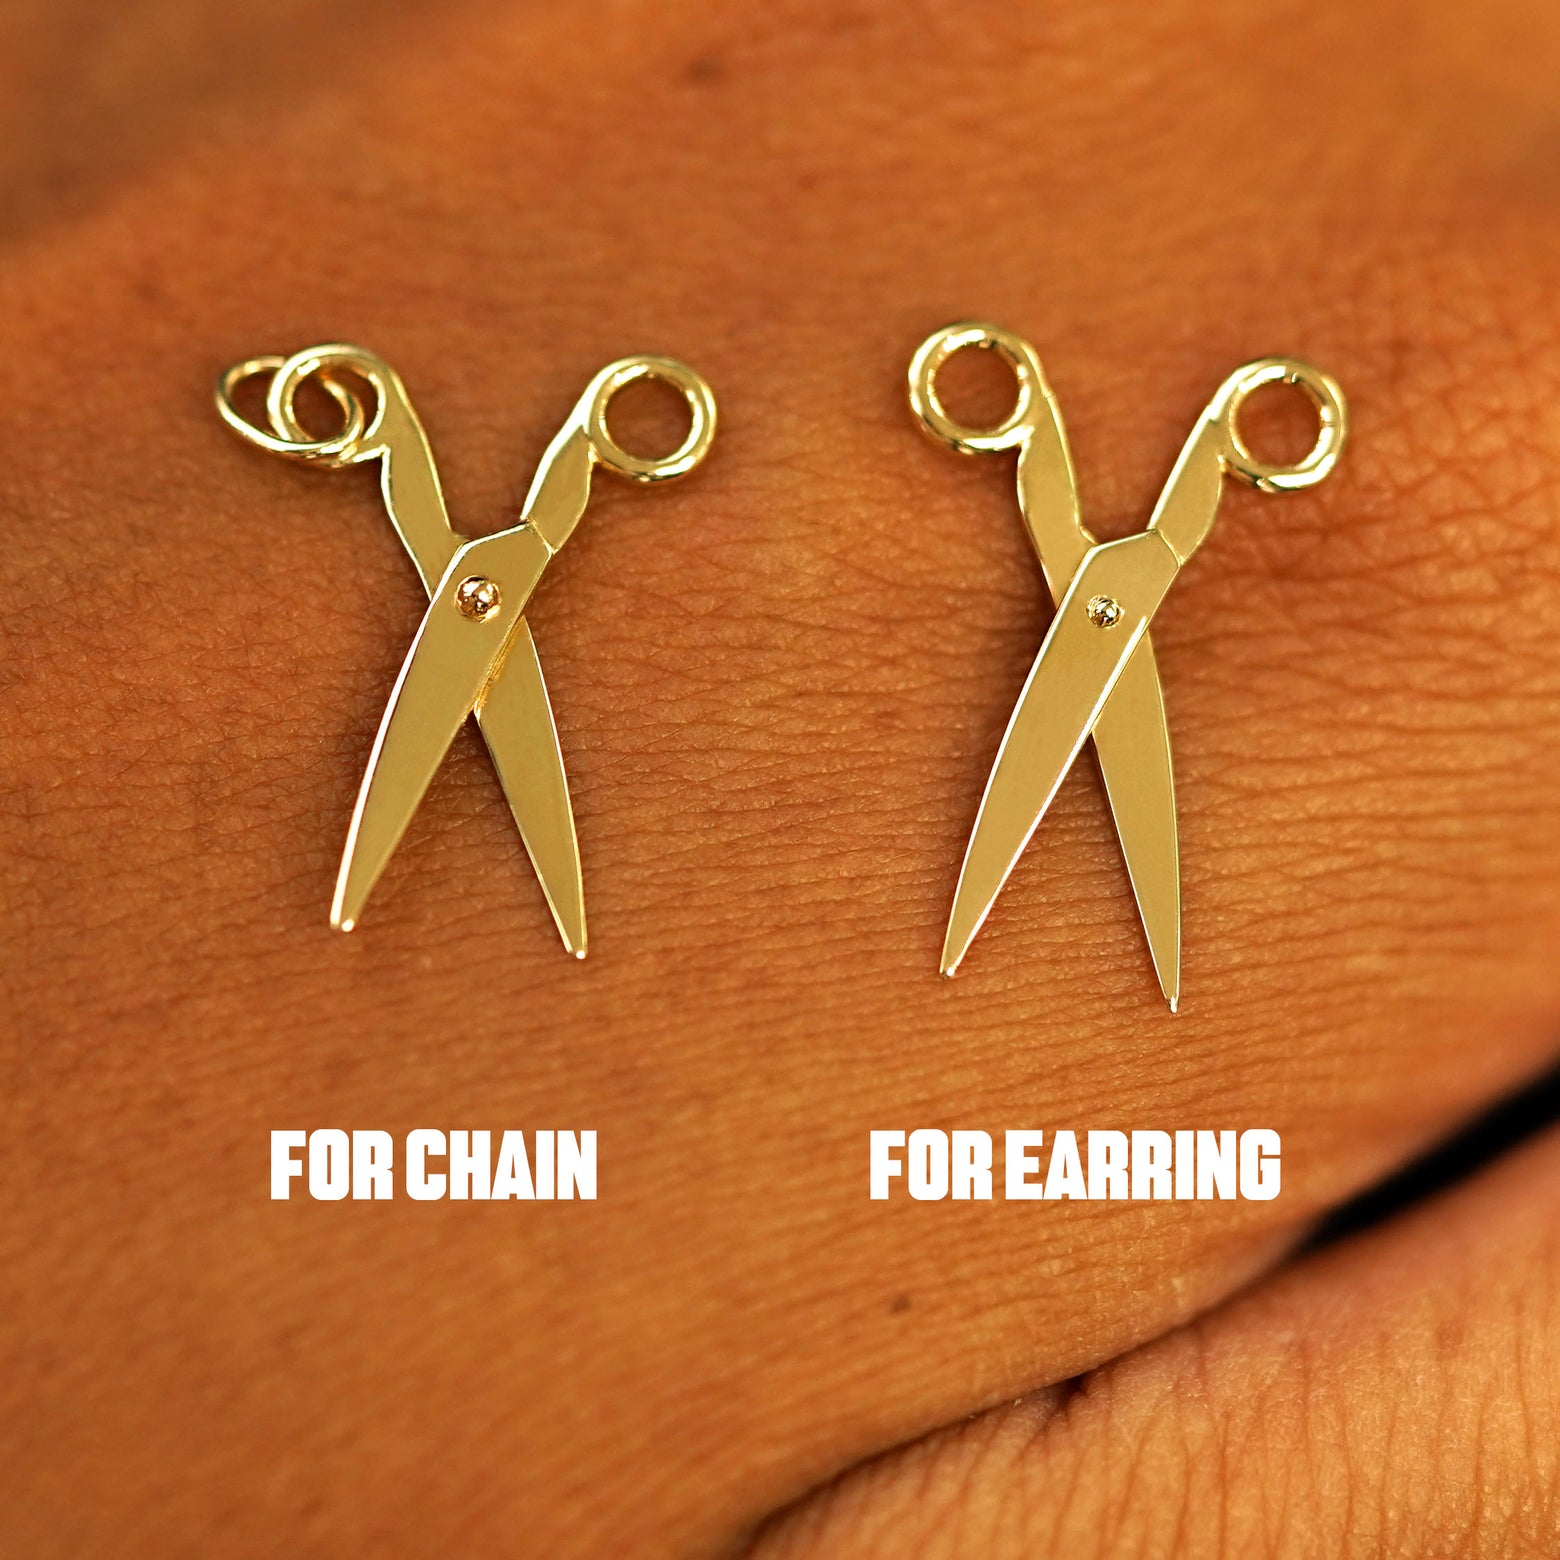 Two 14 karat solid gold Scissors Charms shown in the For Chain and For Earring options